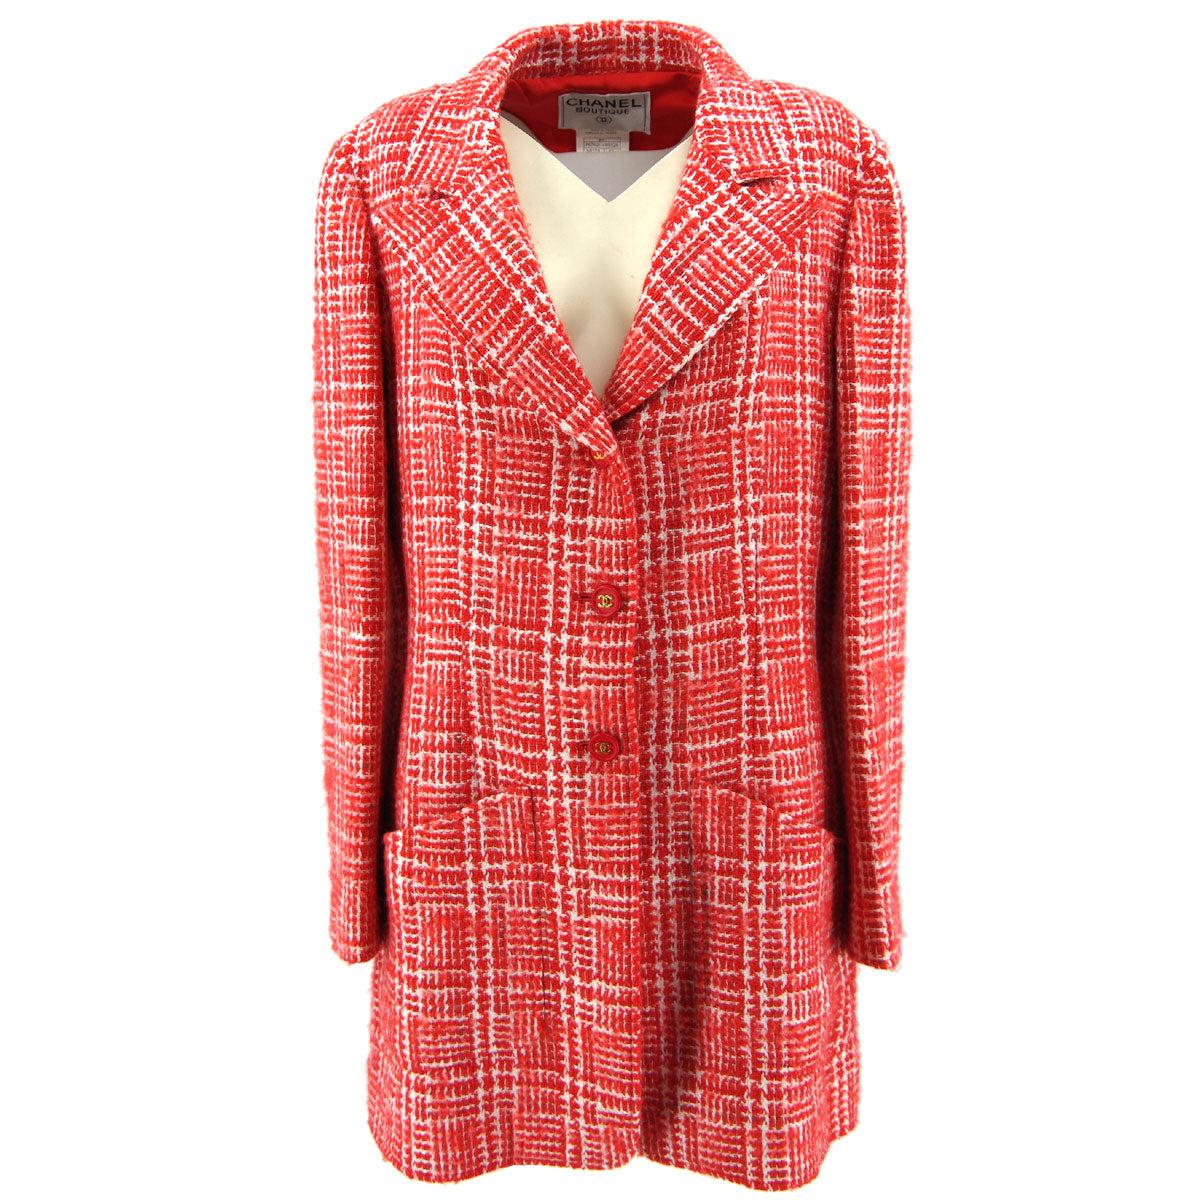 Chanel 1997 Spring Checked Tweed Blazer #42 in Red